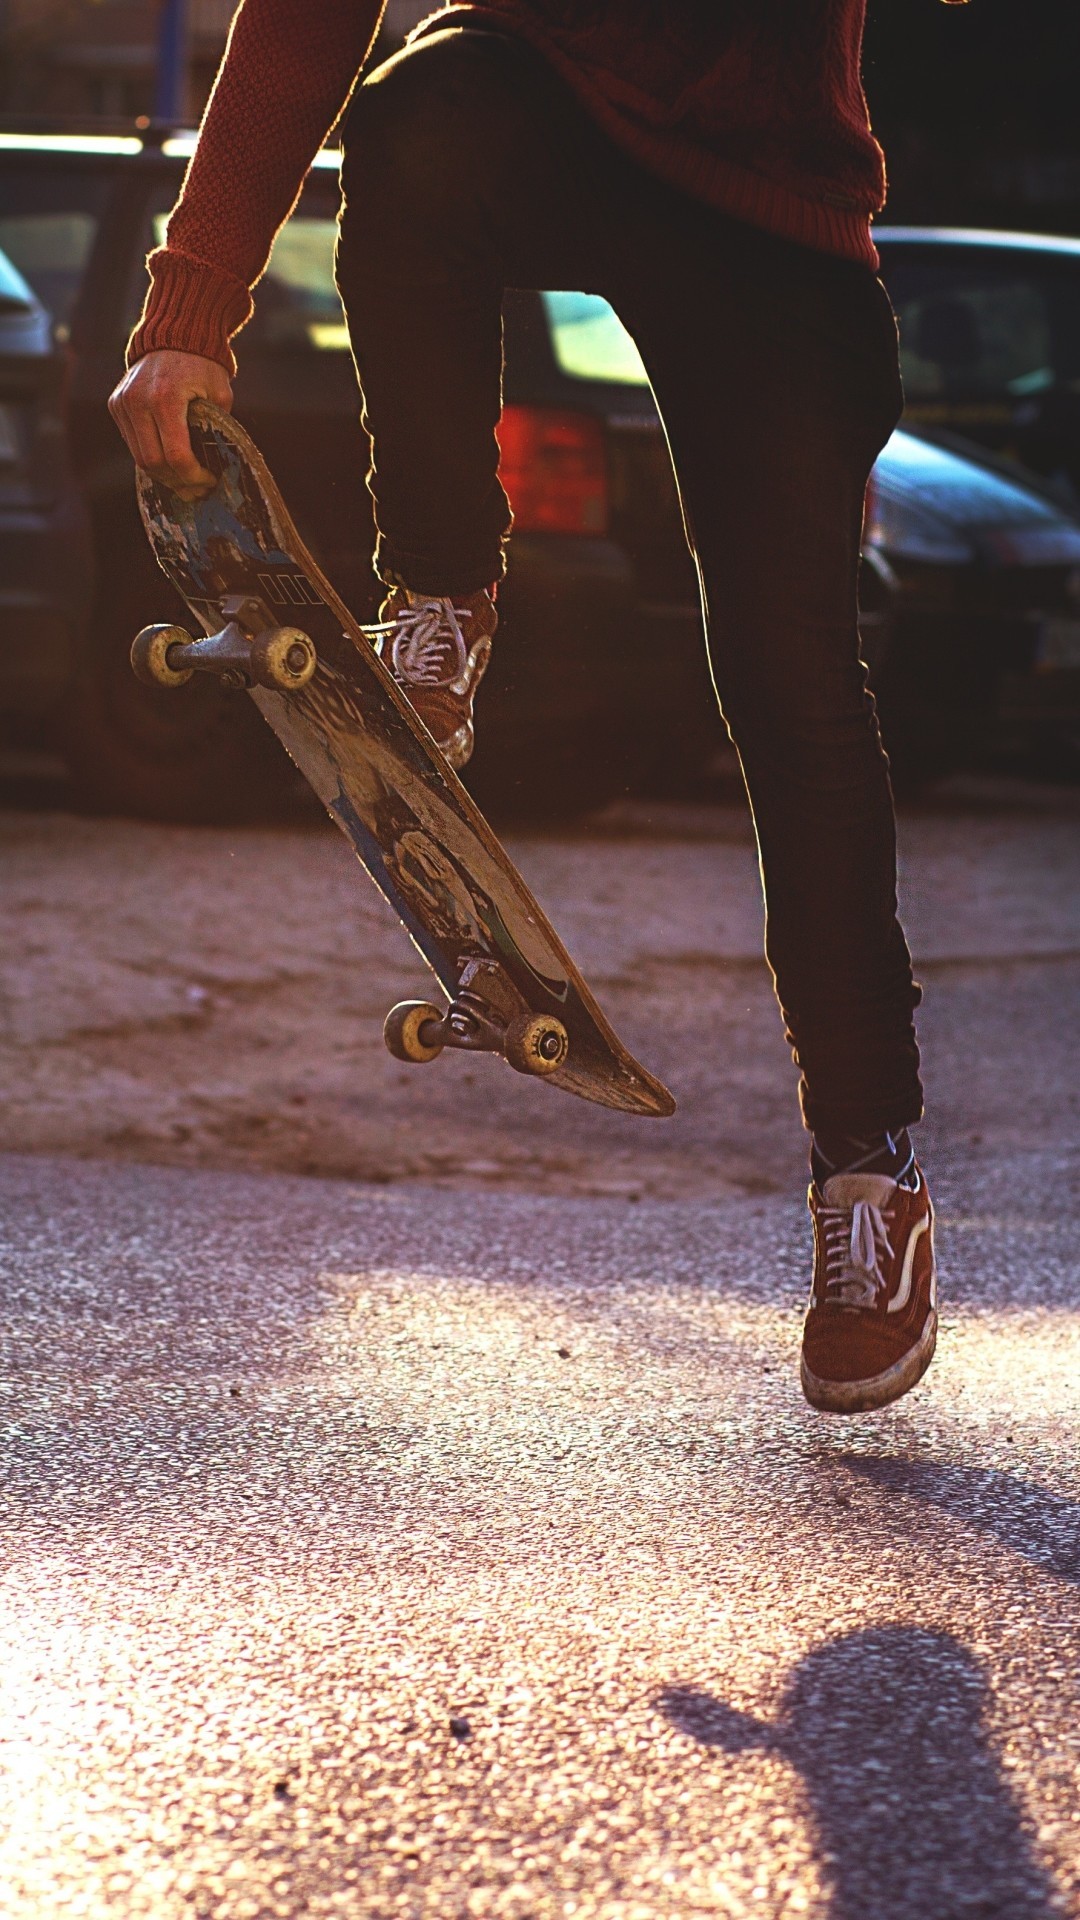 Skate Photos Download The BEST Free Skate Stock Photos  HD Images